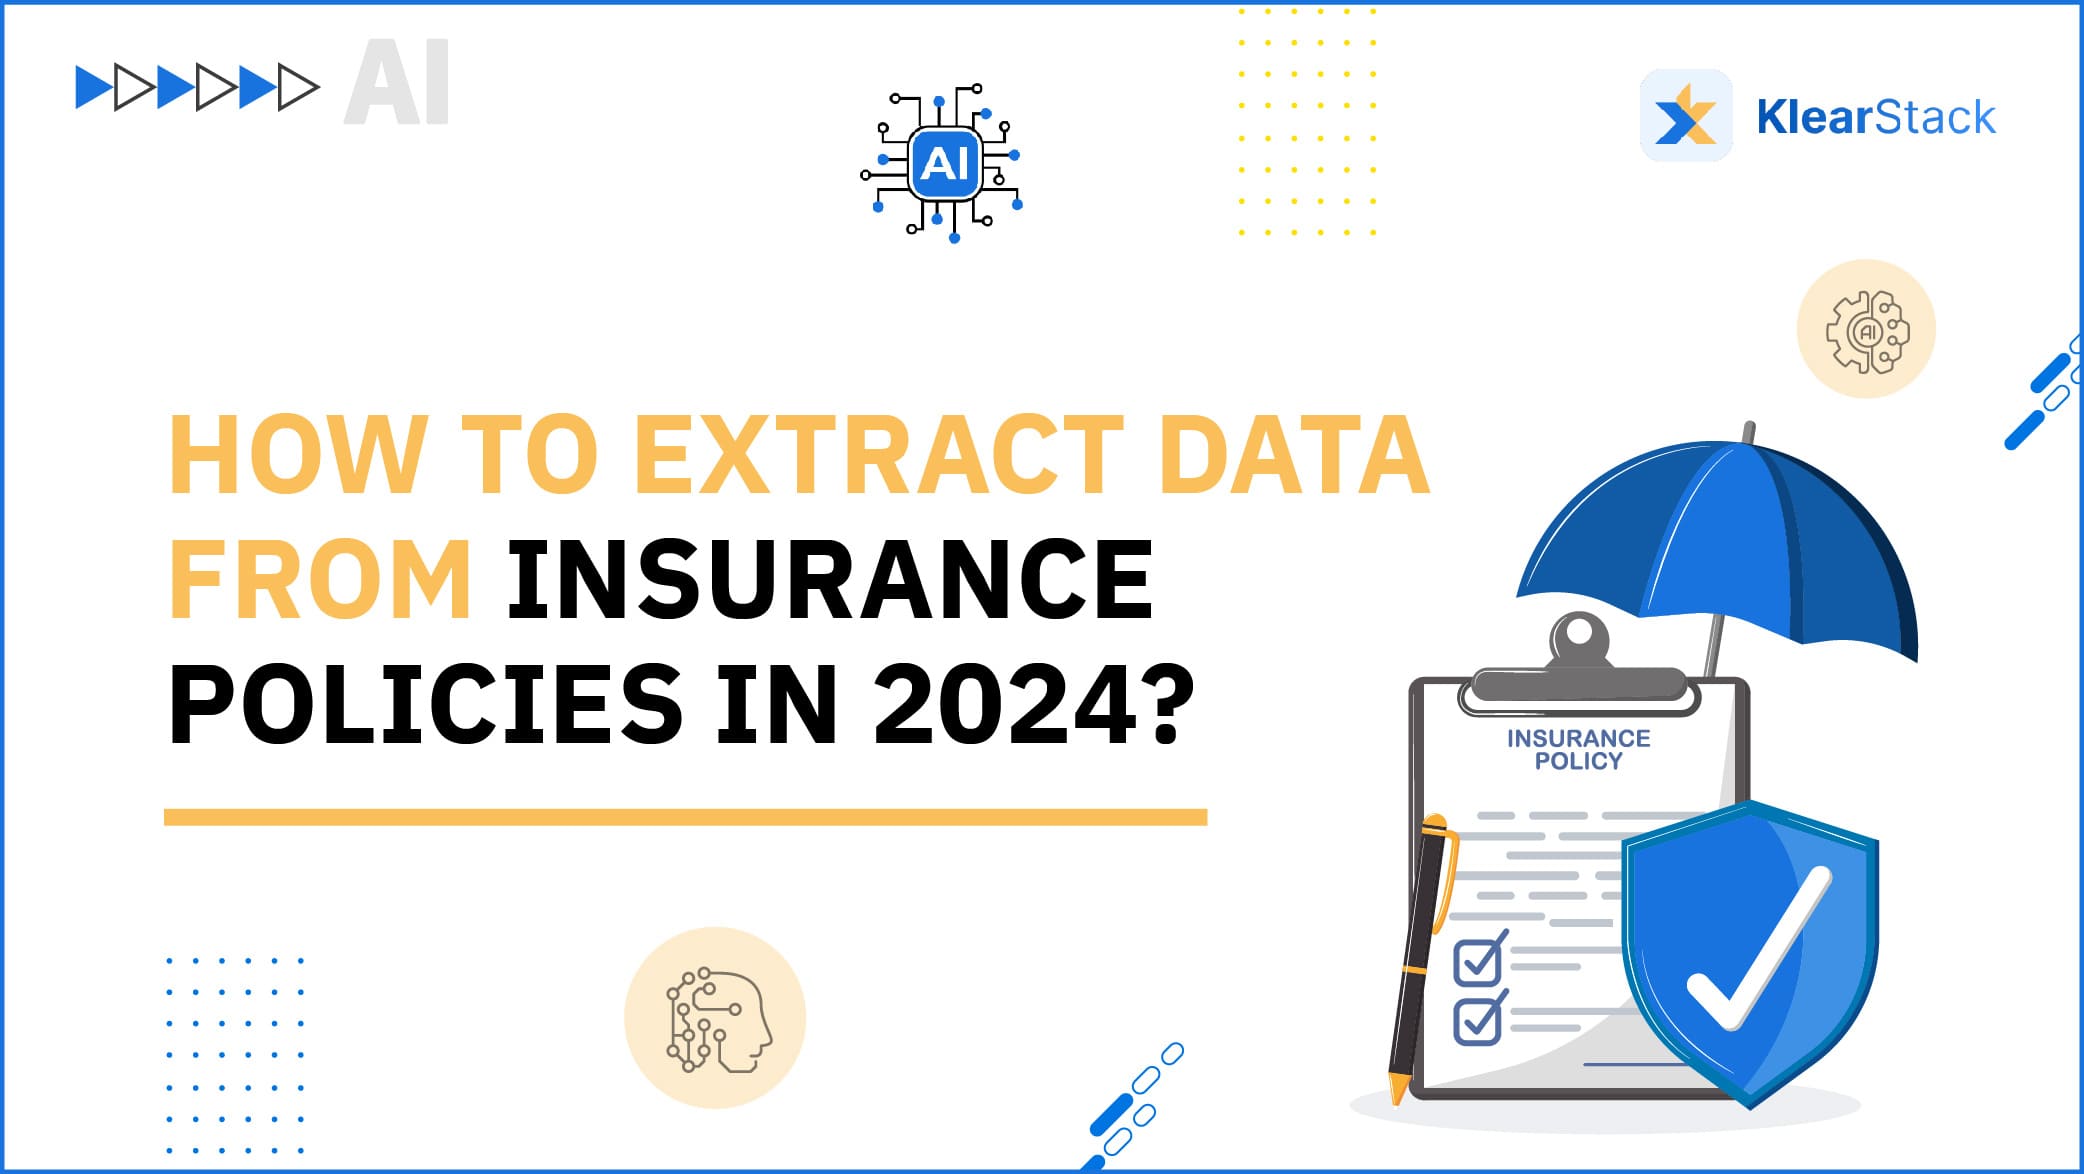 How to Extract Data from Insurance Policies in 2024